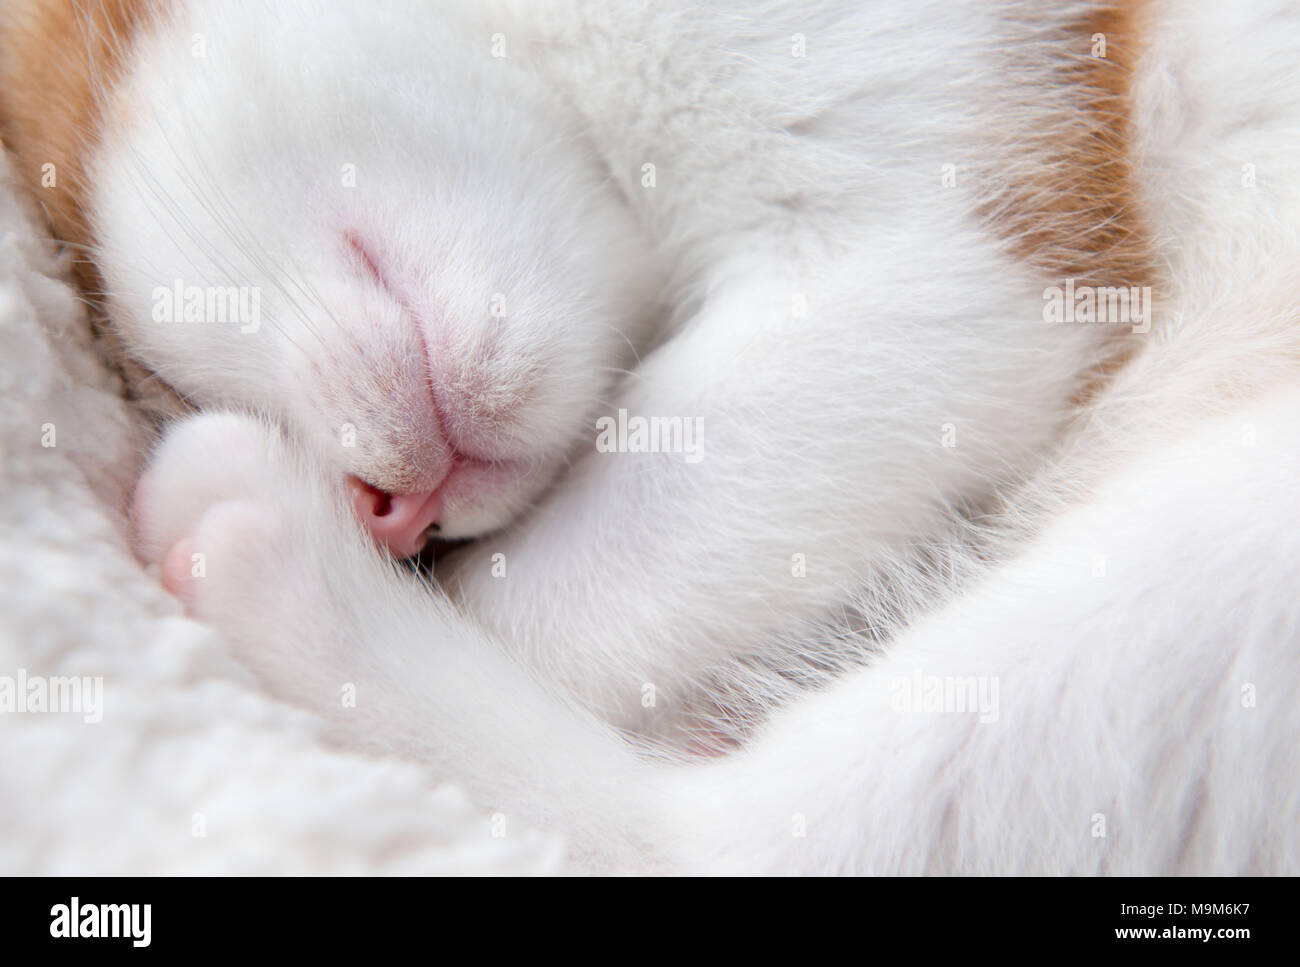 Single cute tired little kitten curled up in a furry basket Stock Photo